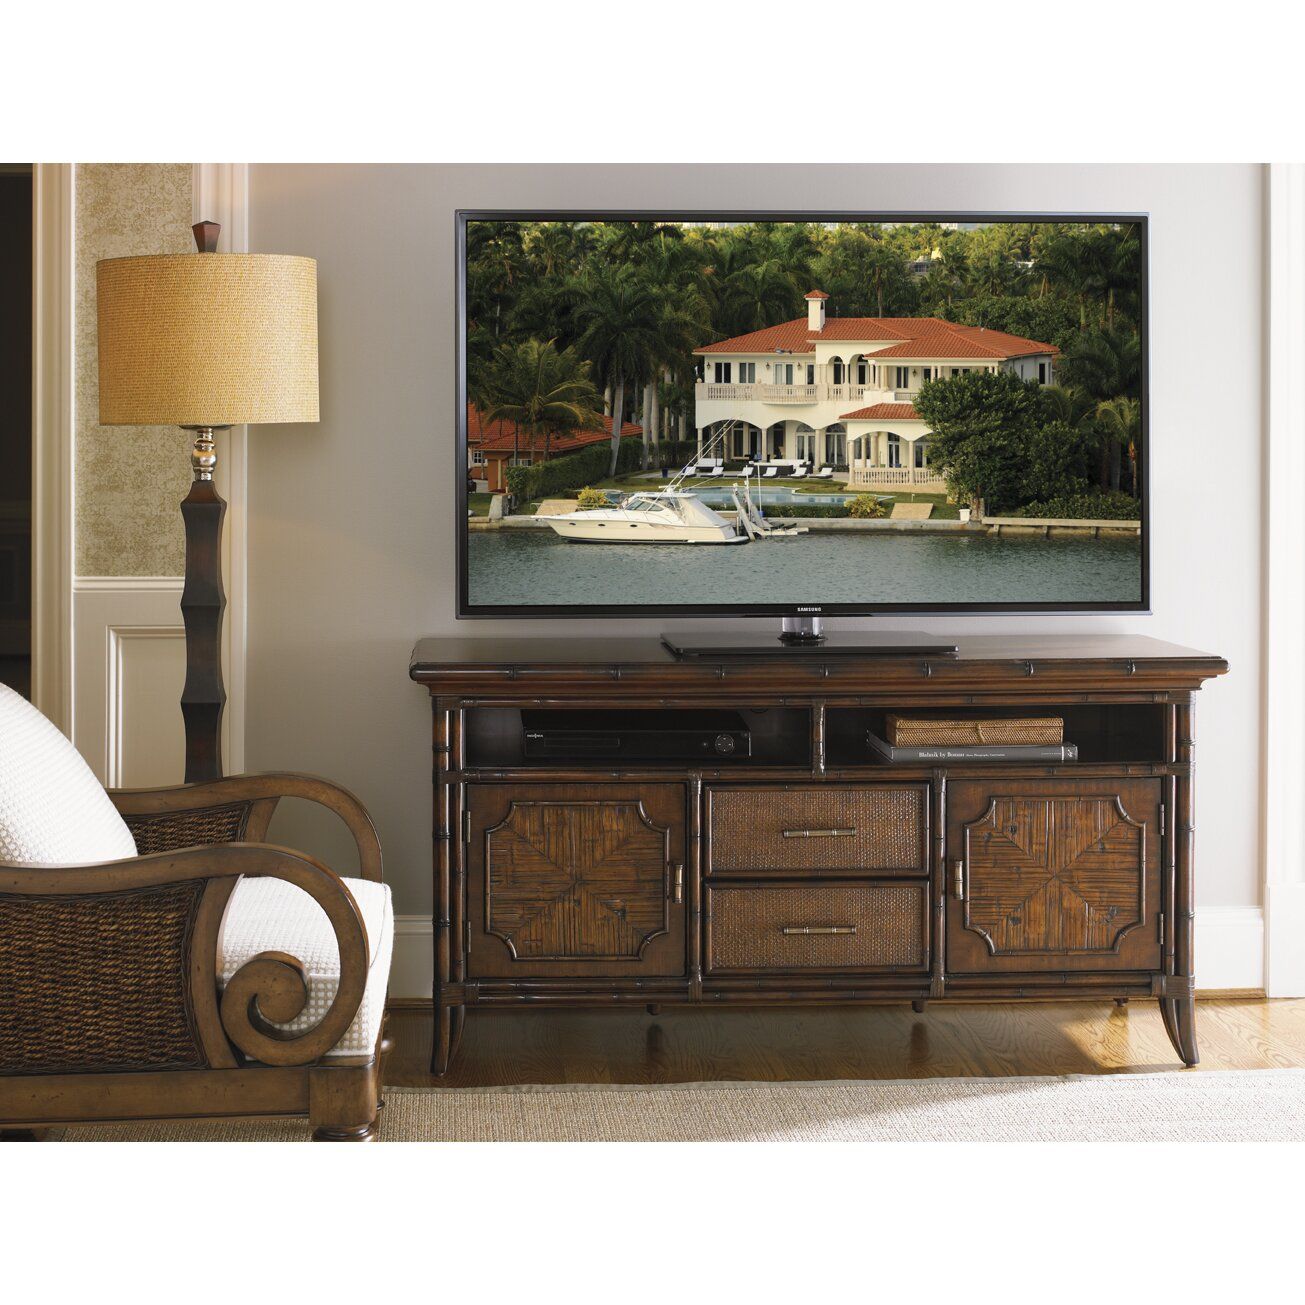 Sligh Bal Harbor Crystal Bay Tv Stand | Wayfair Pertaining To Harbor Wide Tv Stands (View 6 of 15)